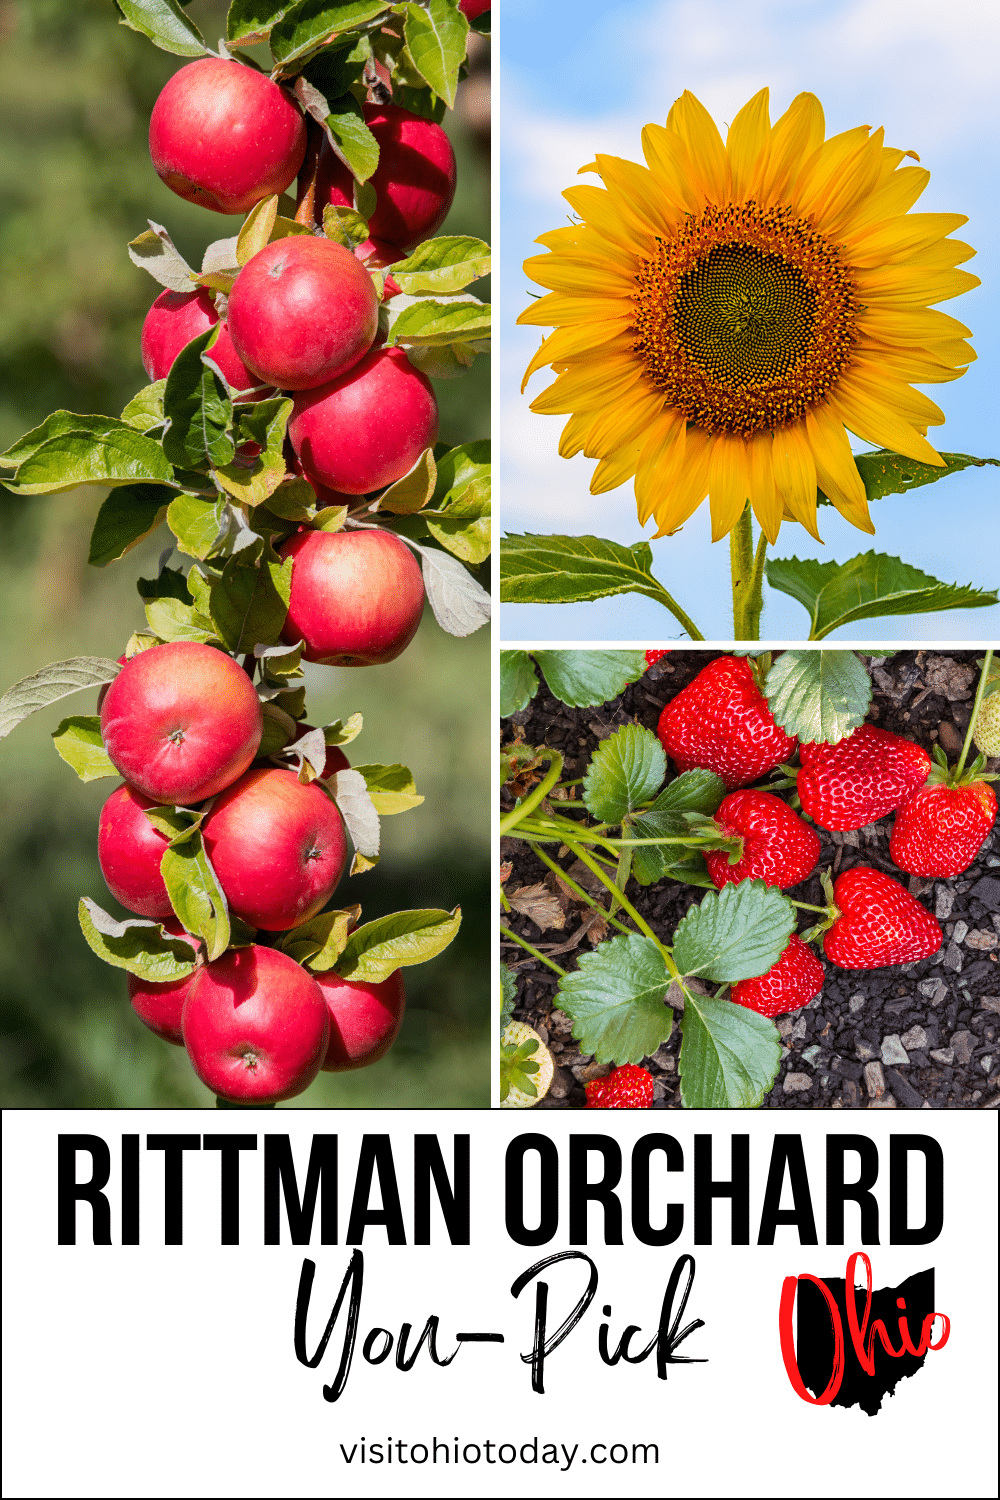 Rittman Orchard is a popular you pick farm that is based in Wayne County, NE Ohio. They have a huge selection of Apples, Cider and Wine. Rittman Orchard also has an onsite Bakery, where you can indulge in treats. Guaranteed fun for all the family - canine companions are welcome too! | Ohio Apples | Apple Picking In Ohio | Visit Ohio Today